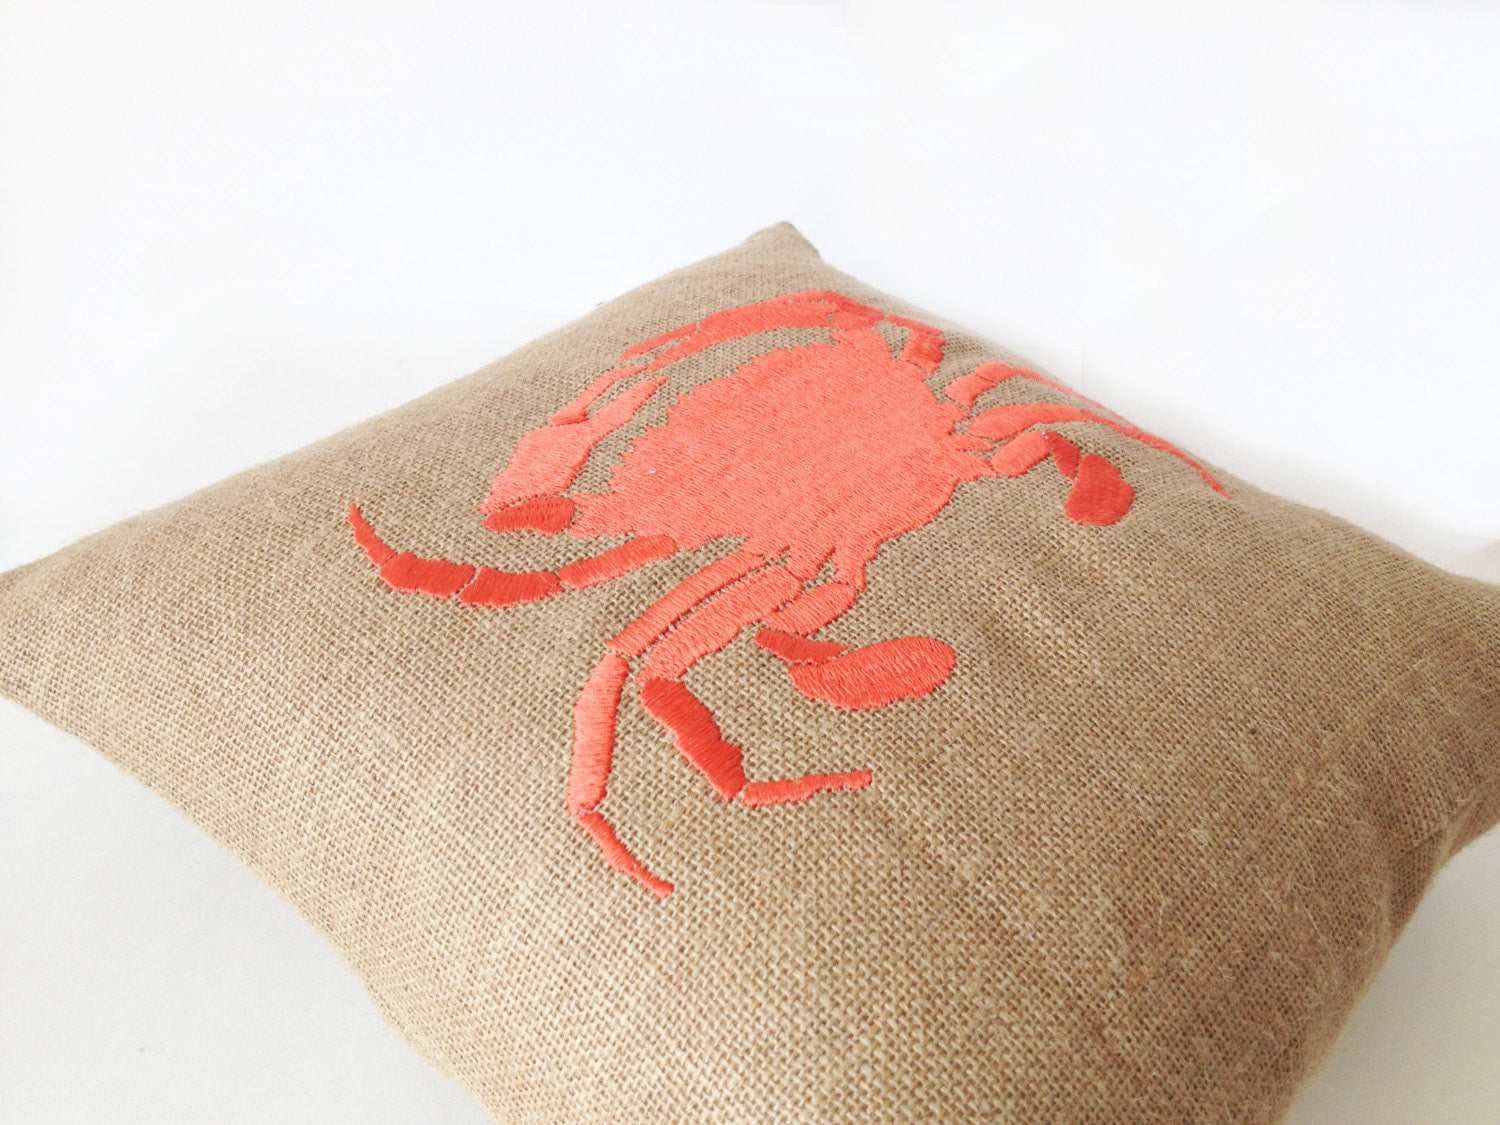 Handmade sea pillow cover with embroidered crab design